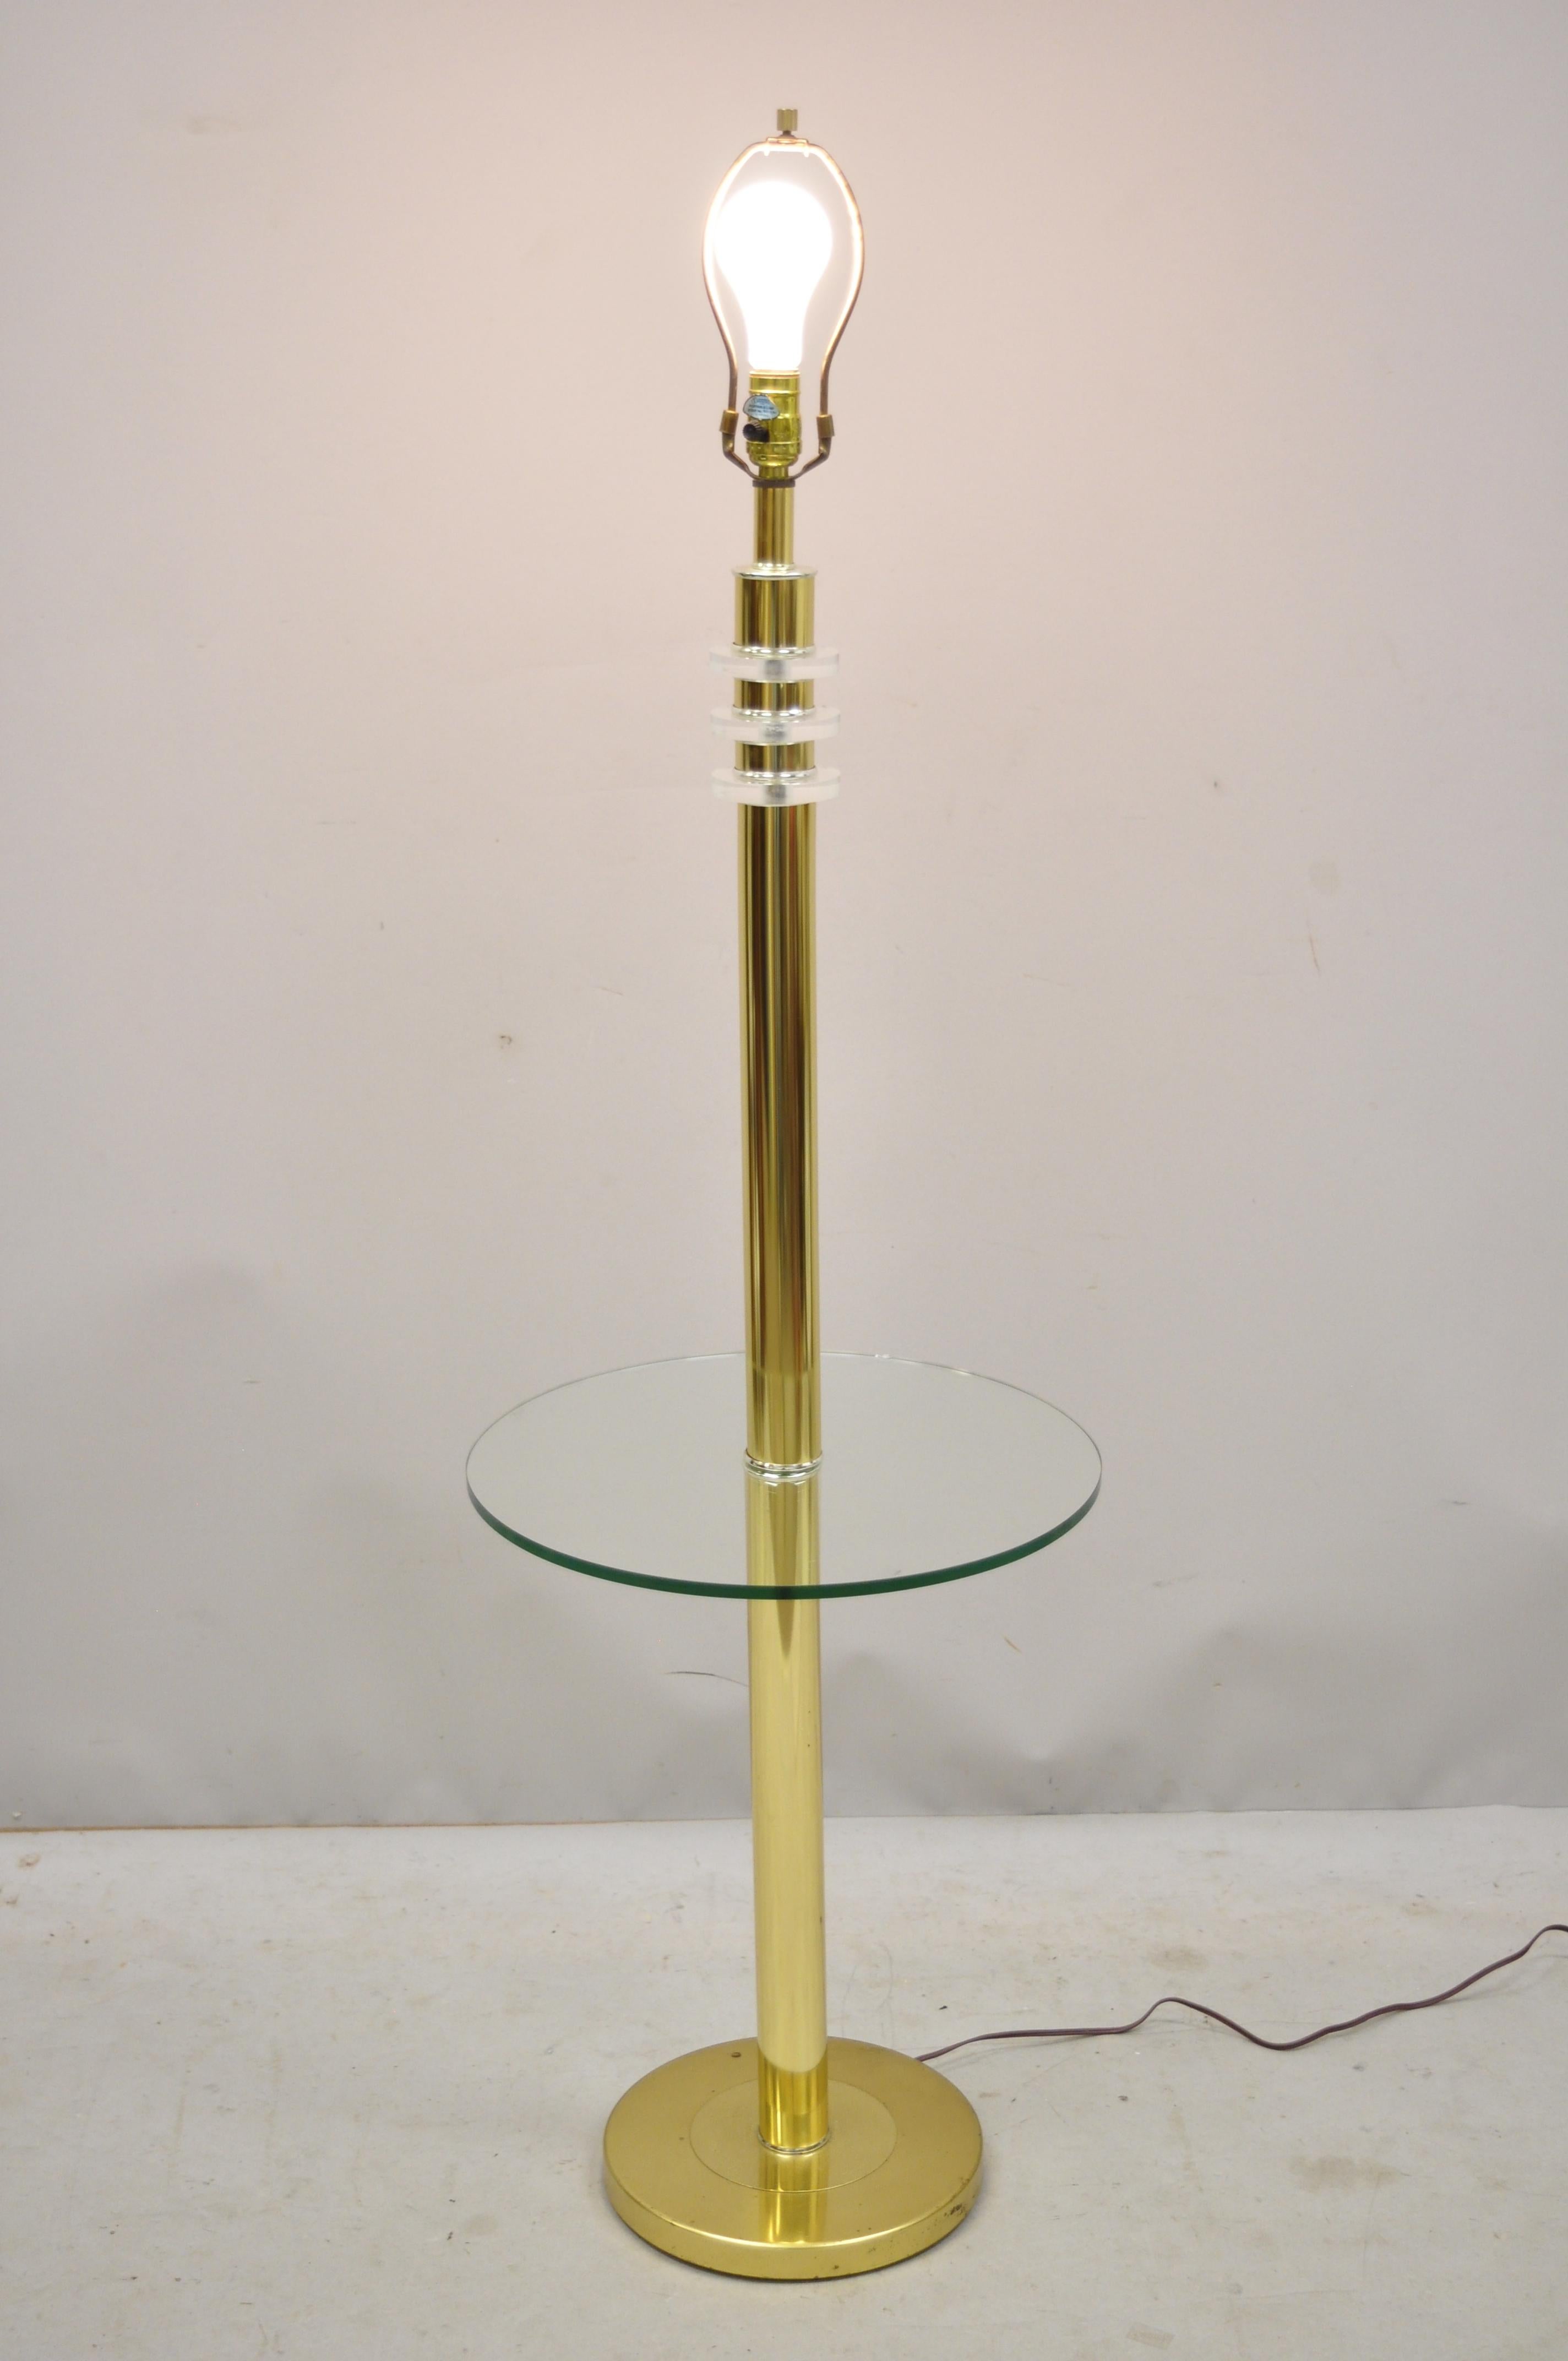 Vintage Mid-Century Modern Lucite brass glass pole floor lamp side table (B). Item features 3-way switch, Lucite accents, brass frame, round glass table top surface, clean Modernist lines, great style and form, circa mid-late 20th century.